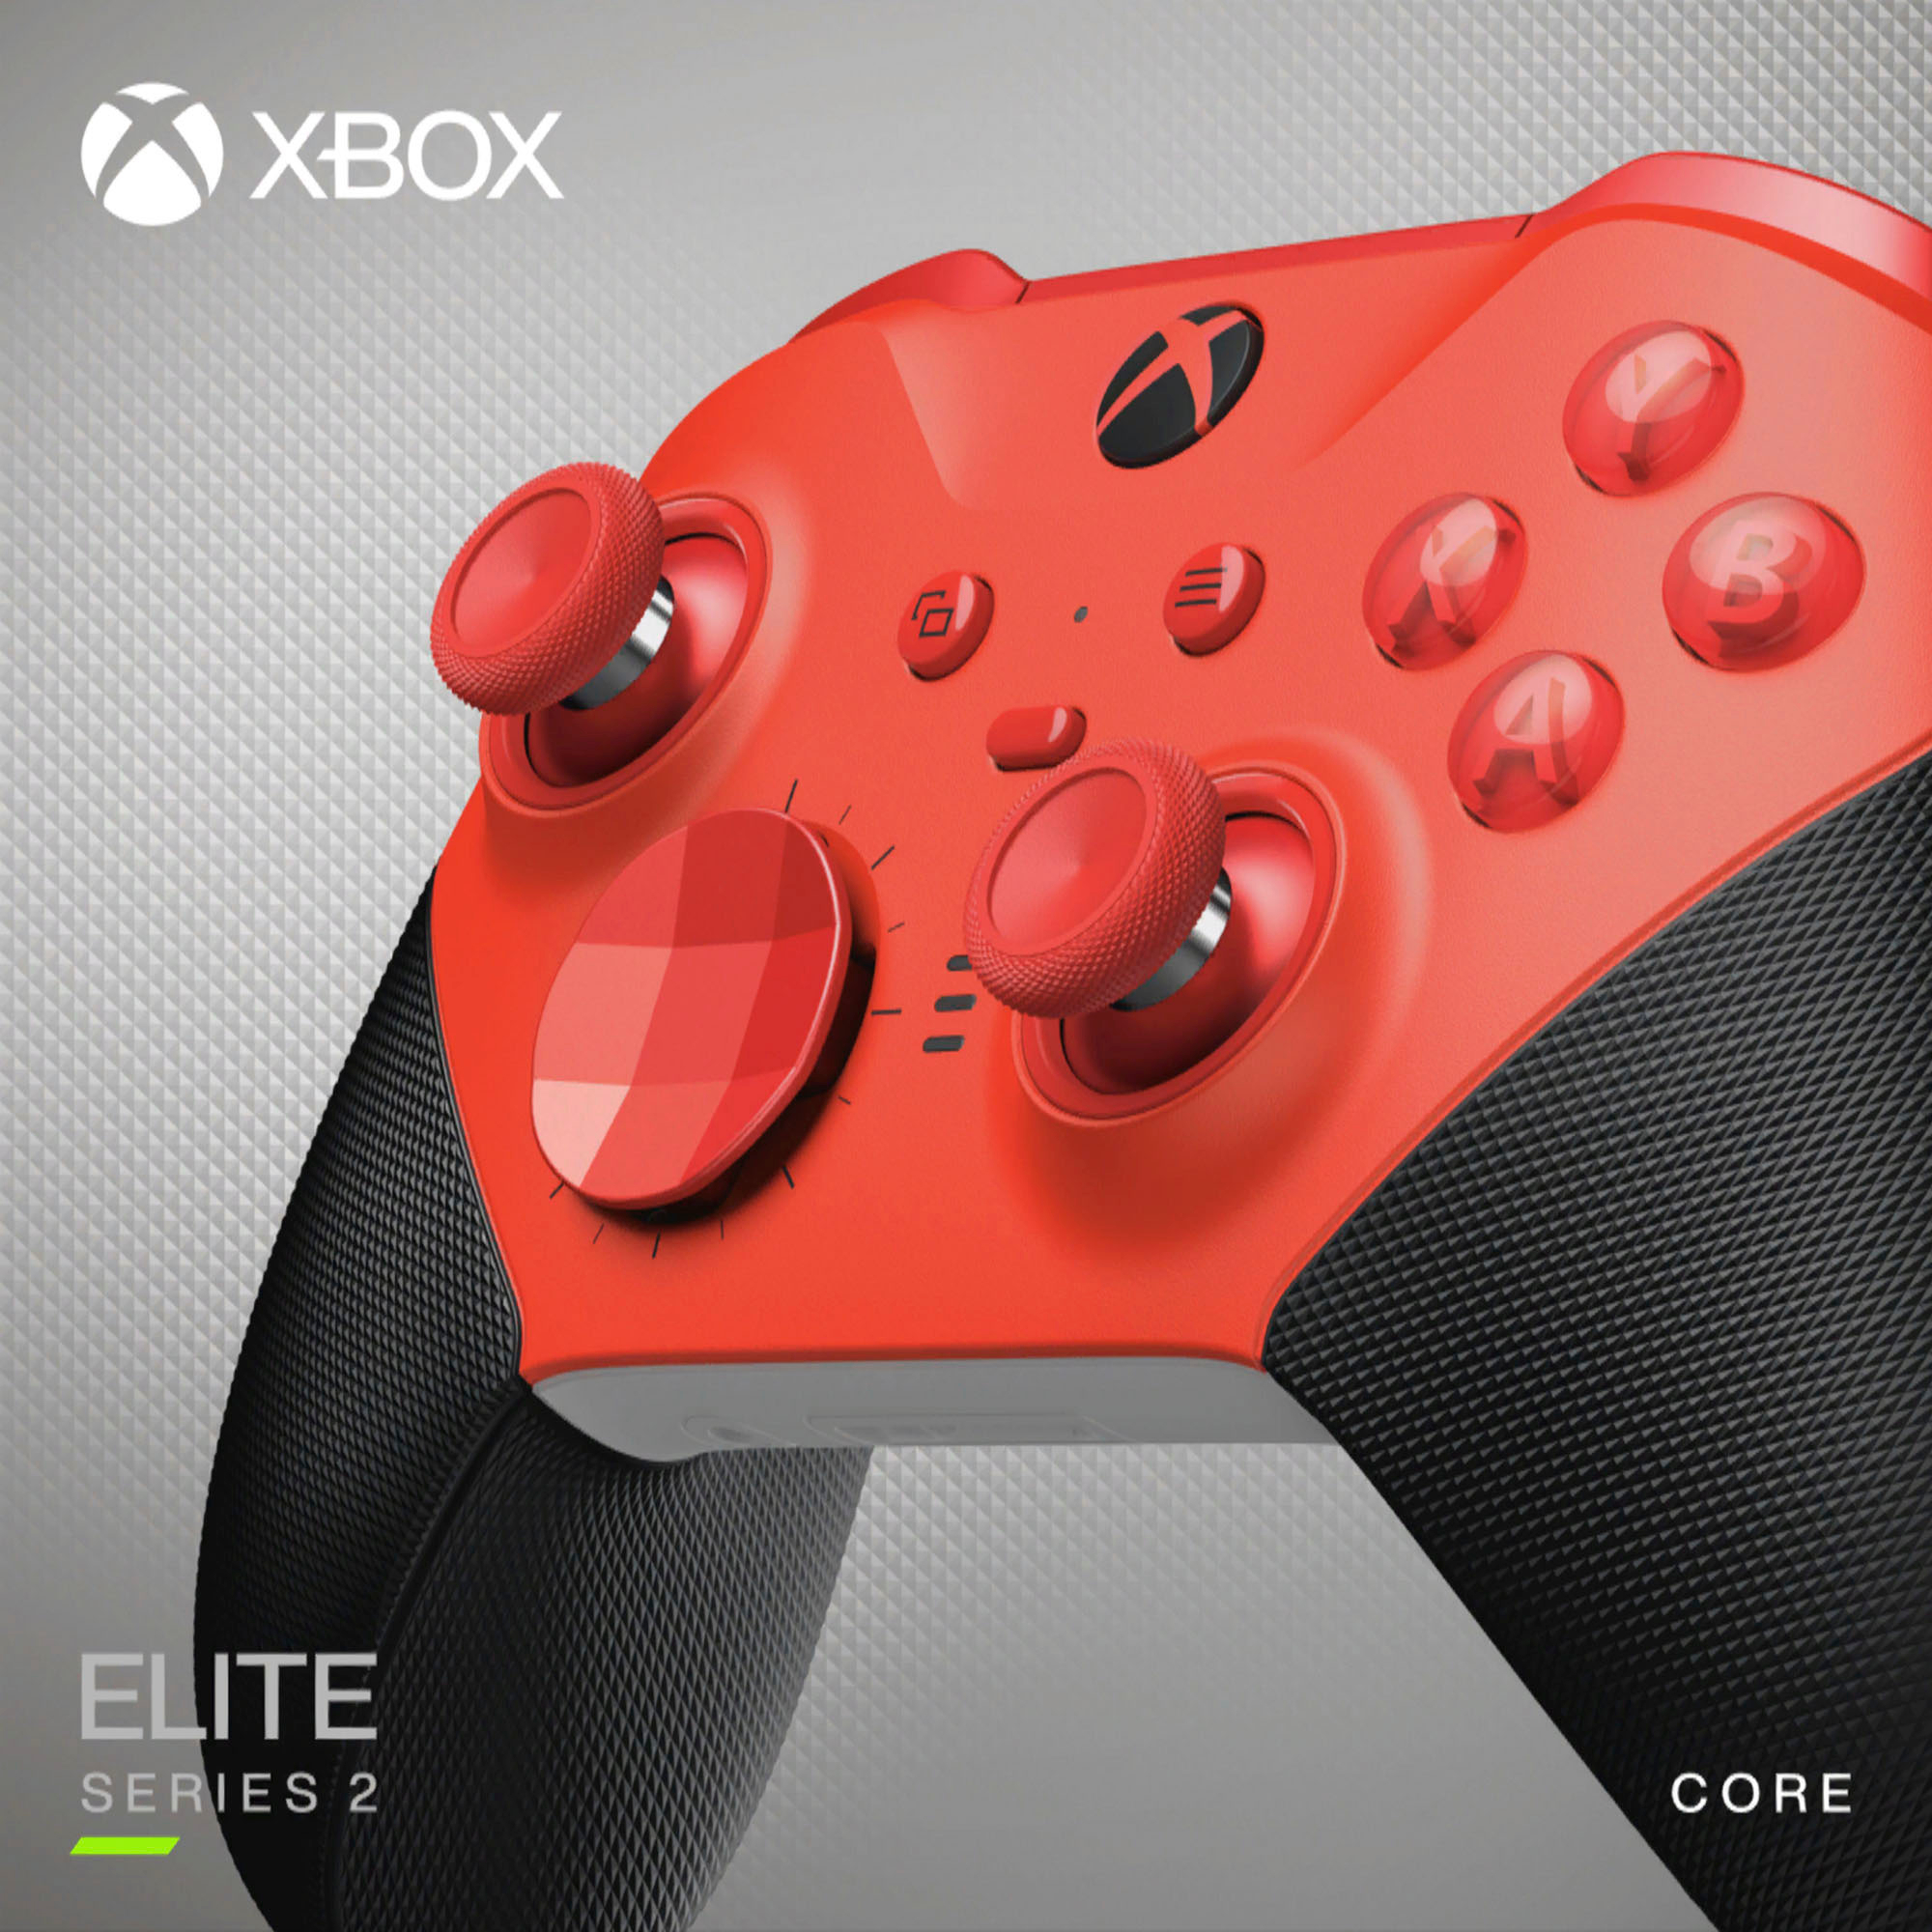  Xbox Elite Series 2 Core Wireless Gaming Controller – Red –  Xbox Series X